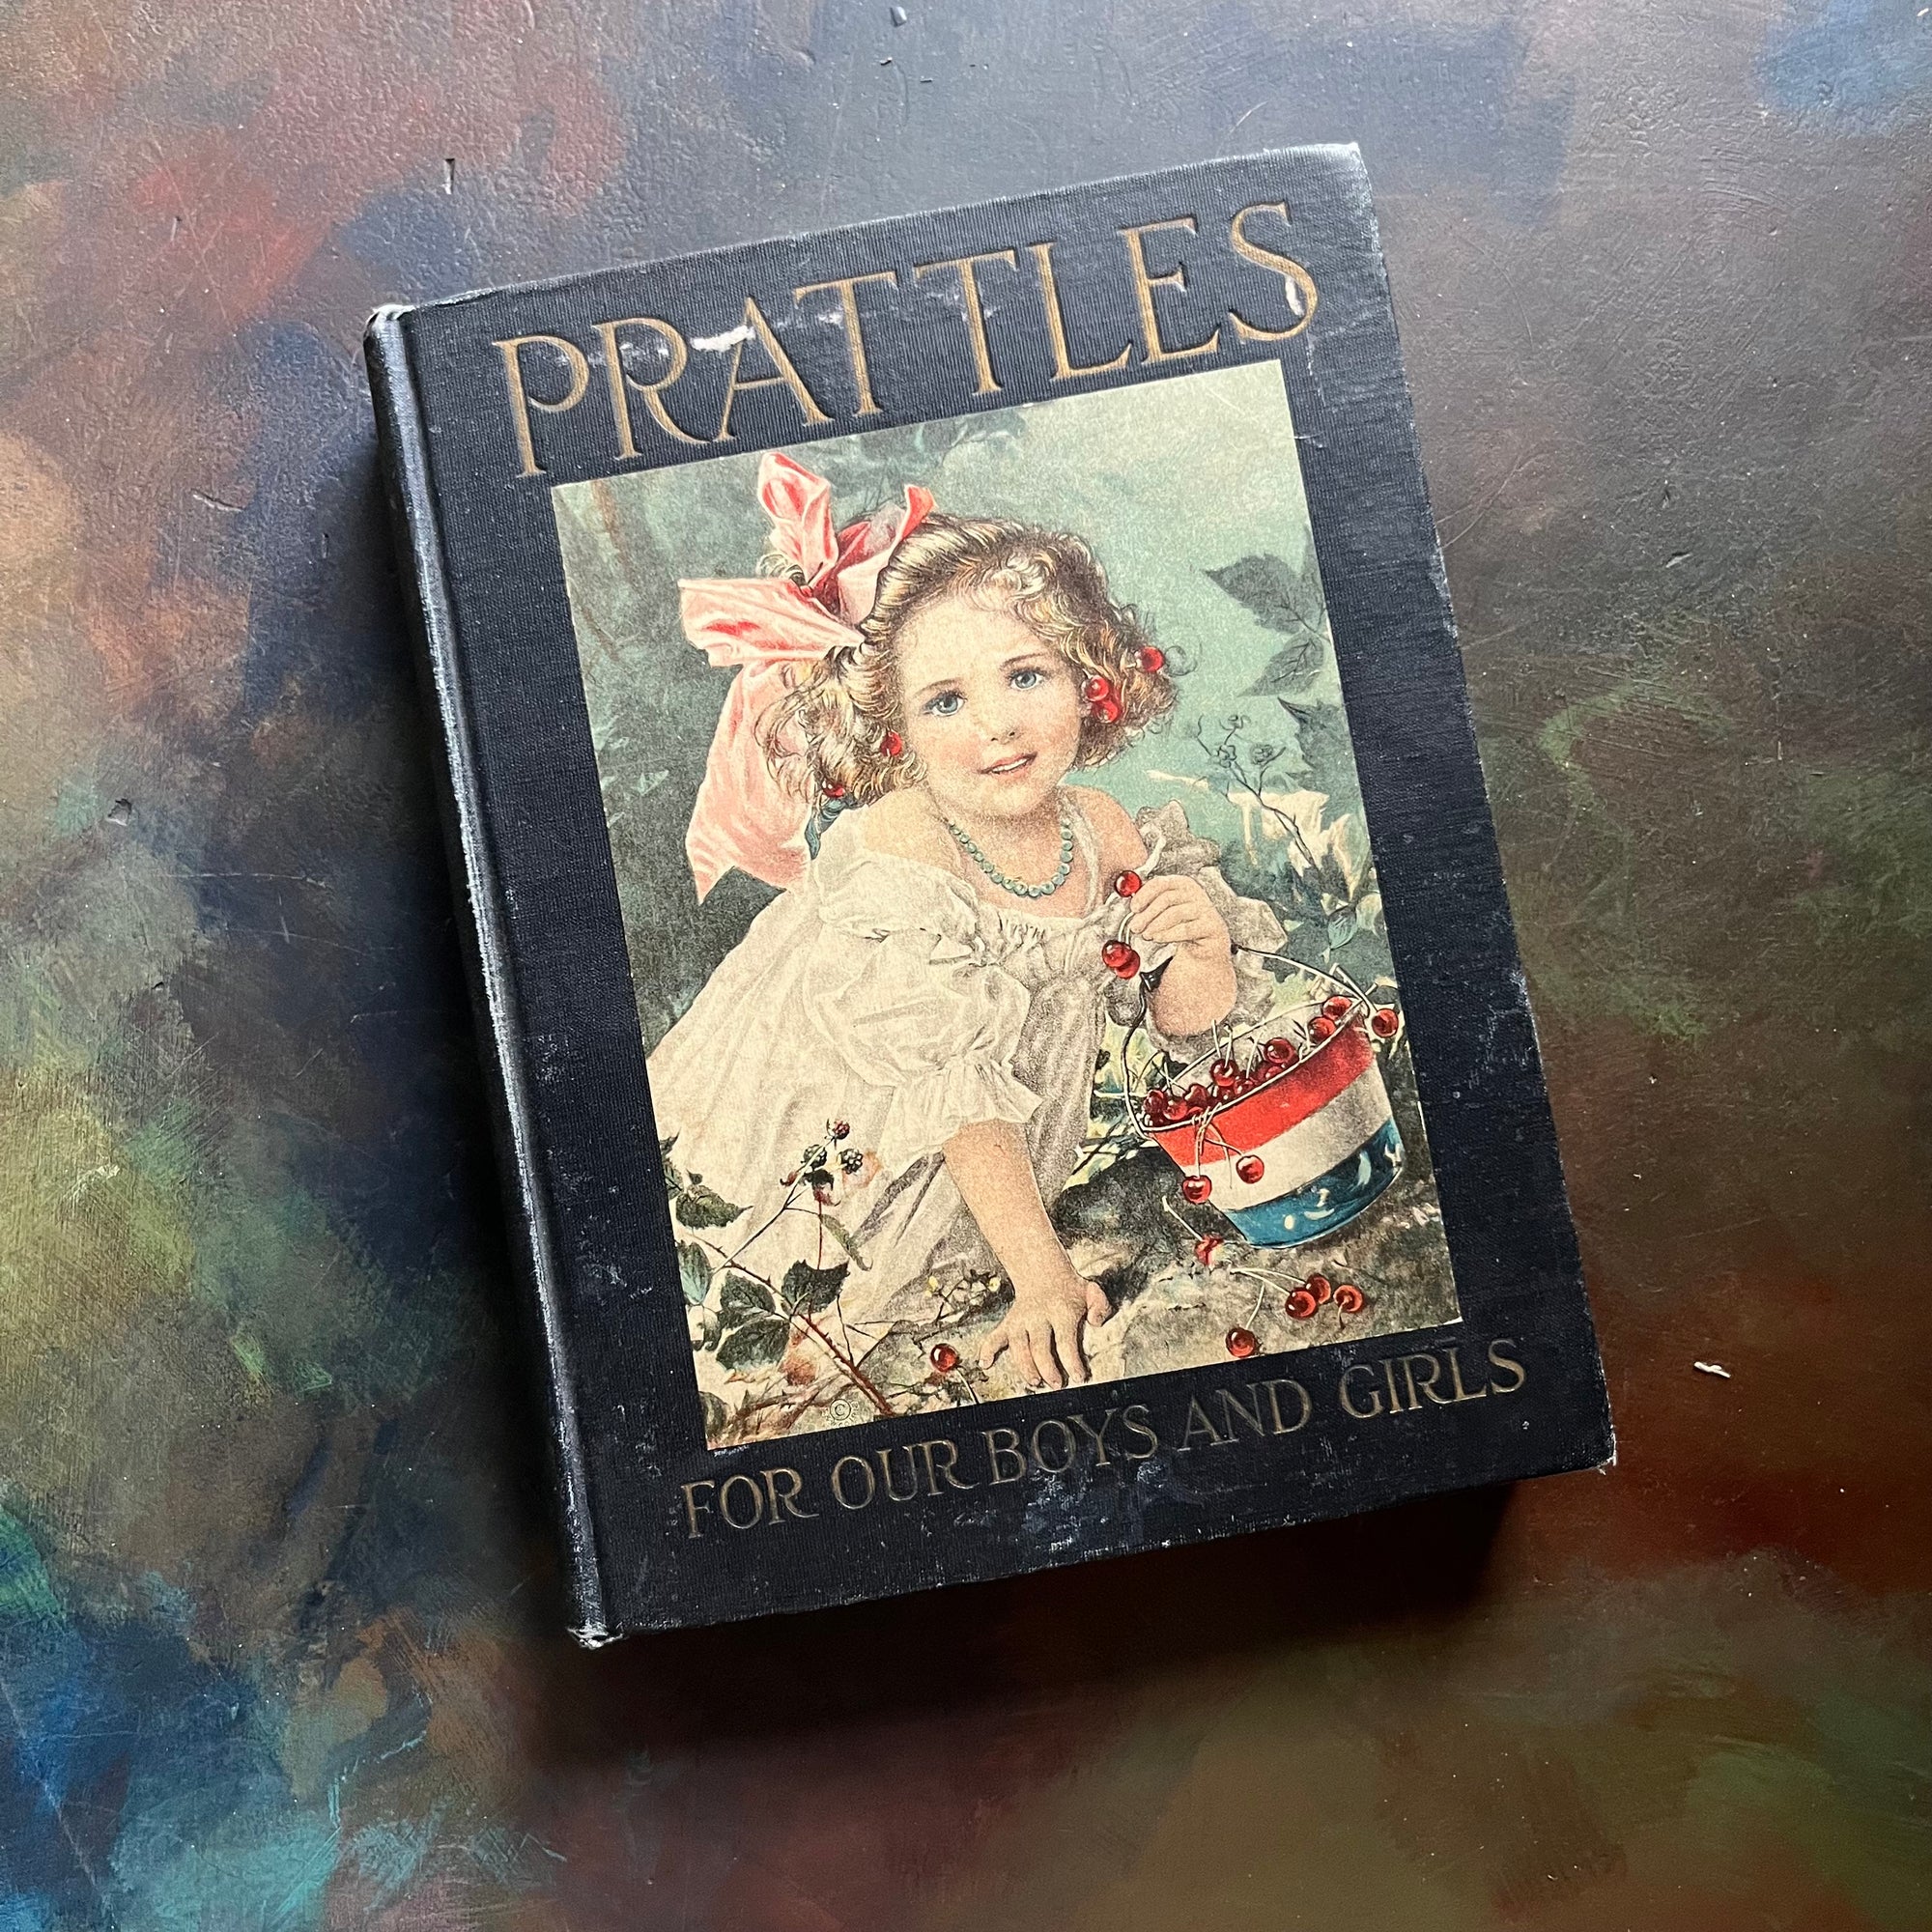 Prattles for Our Boys and Girls-antique children's story book-1912 edition-view of the front cover